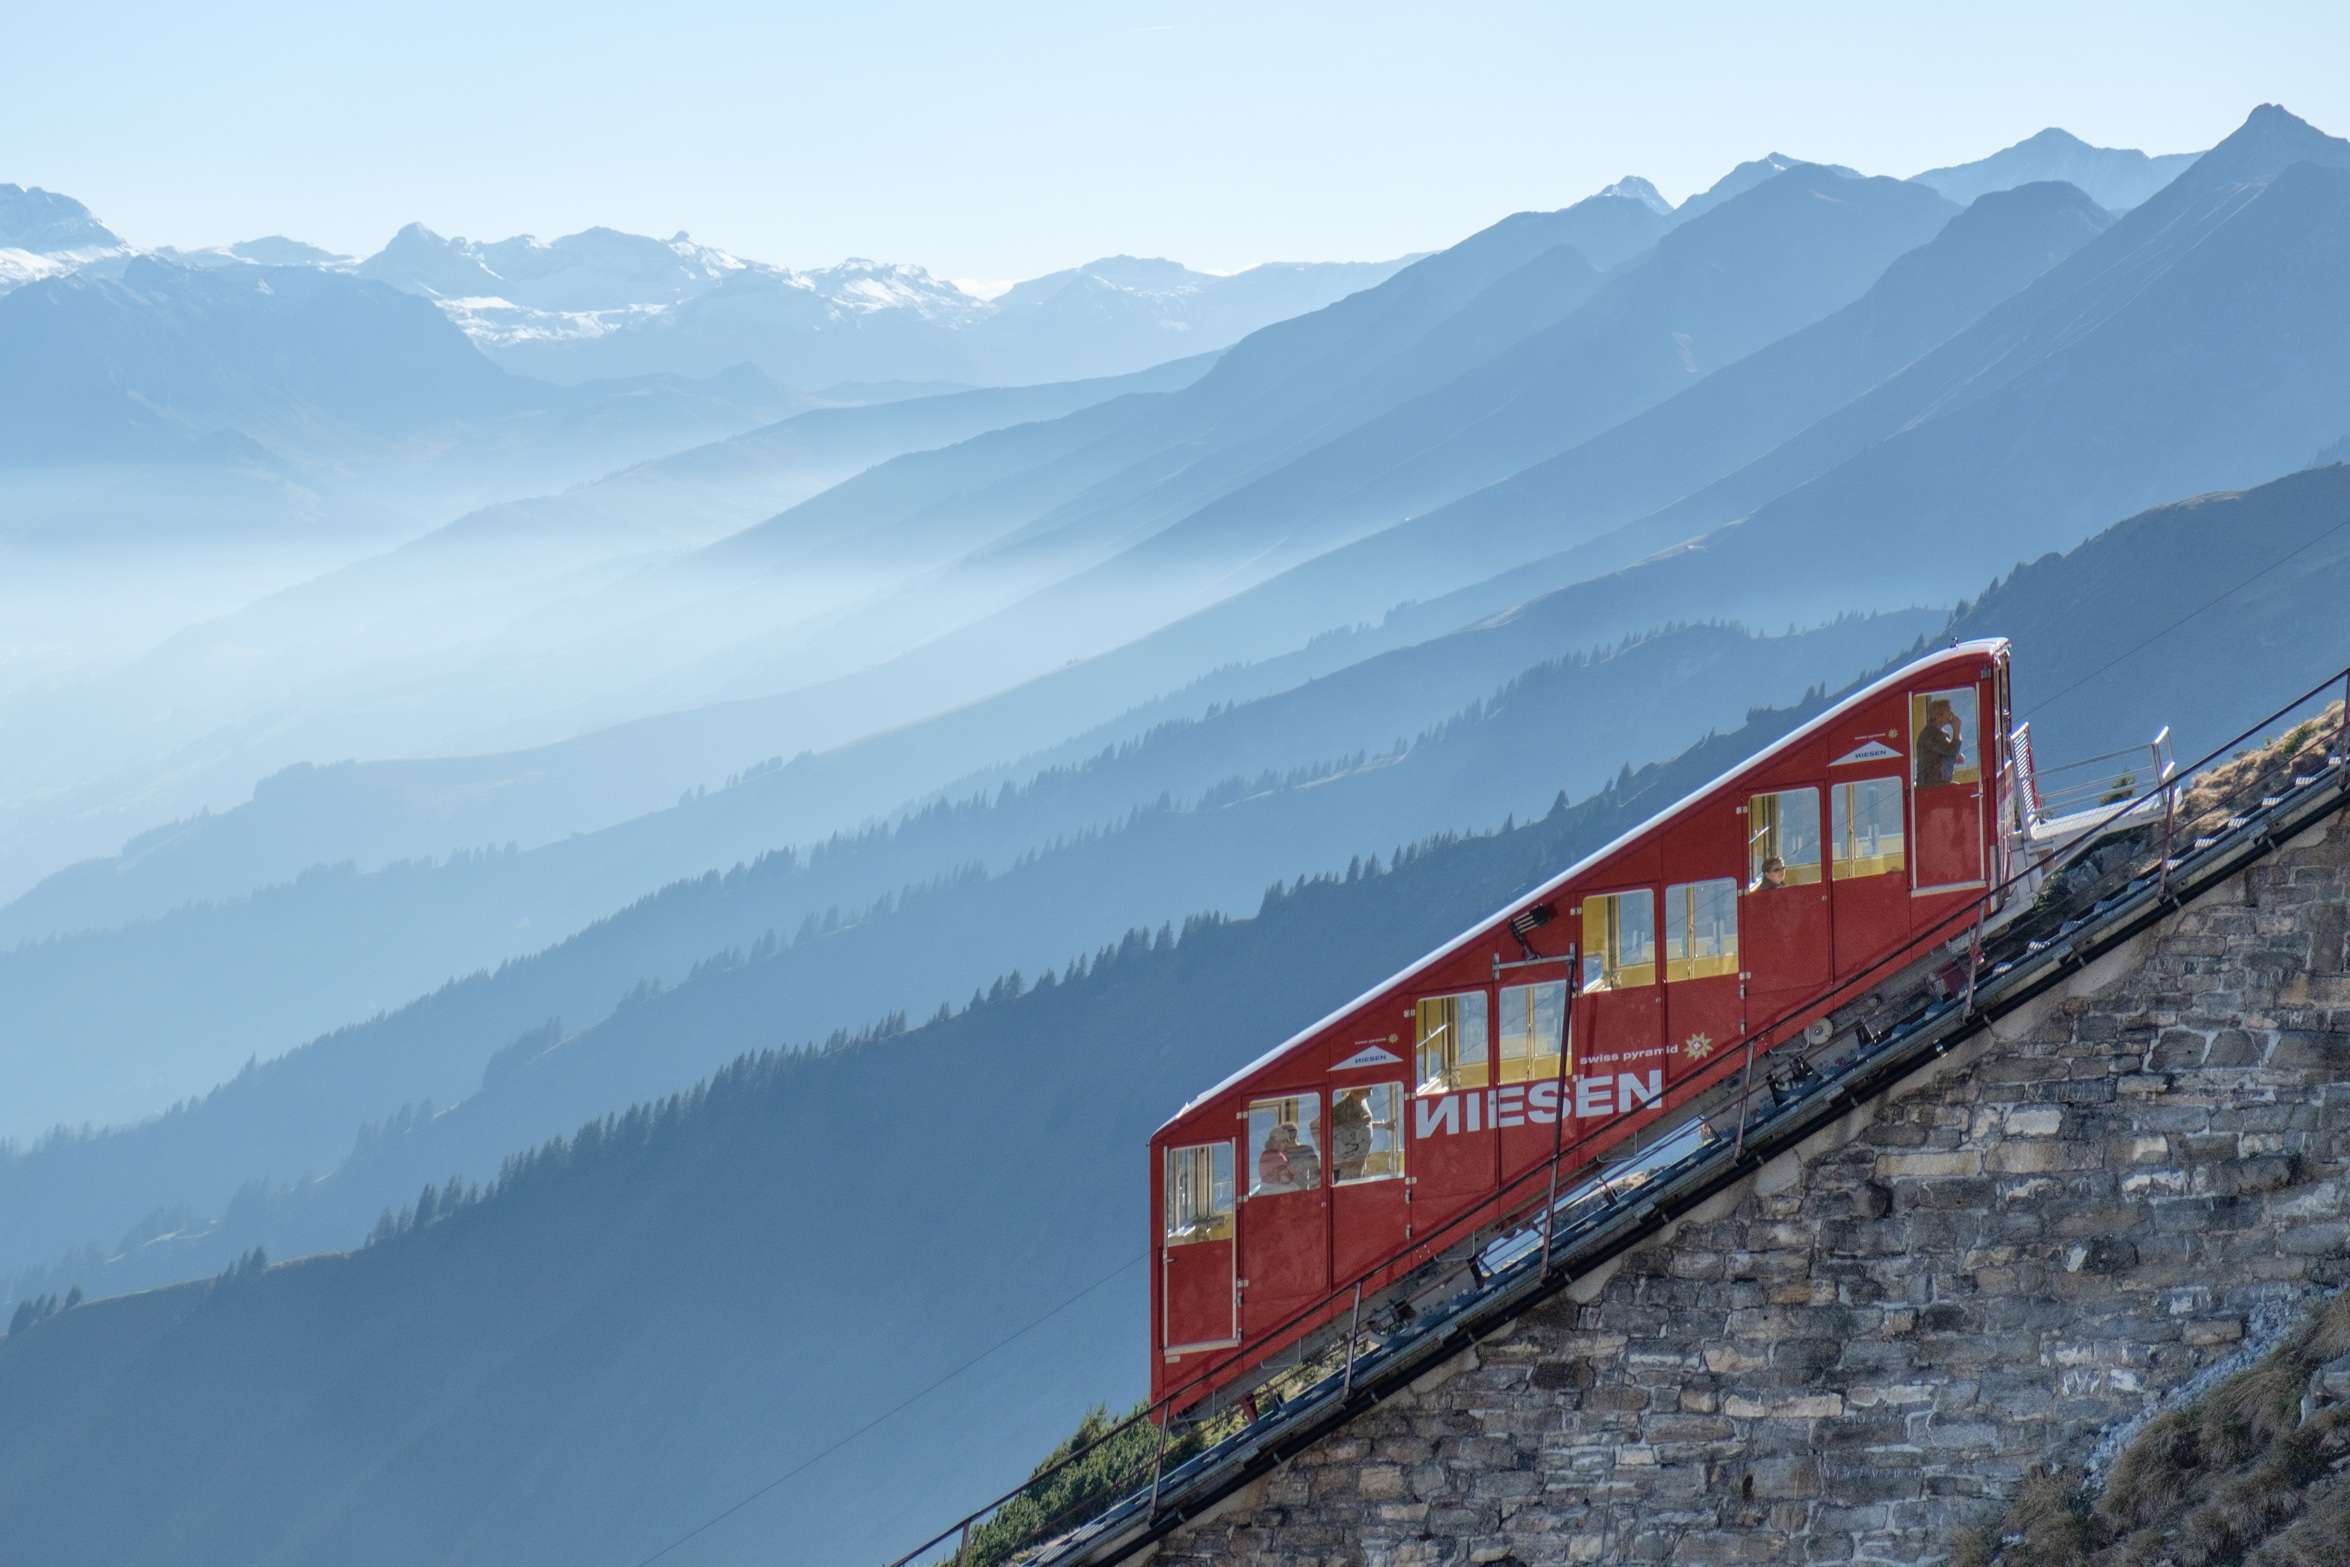 Closeup of the Niesenbahn with mountain slopes in the background